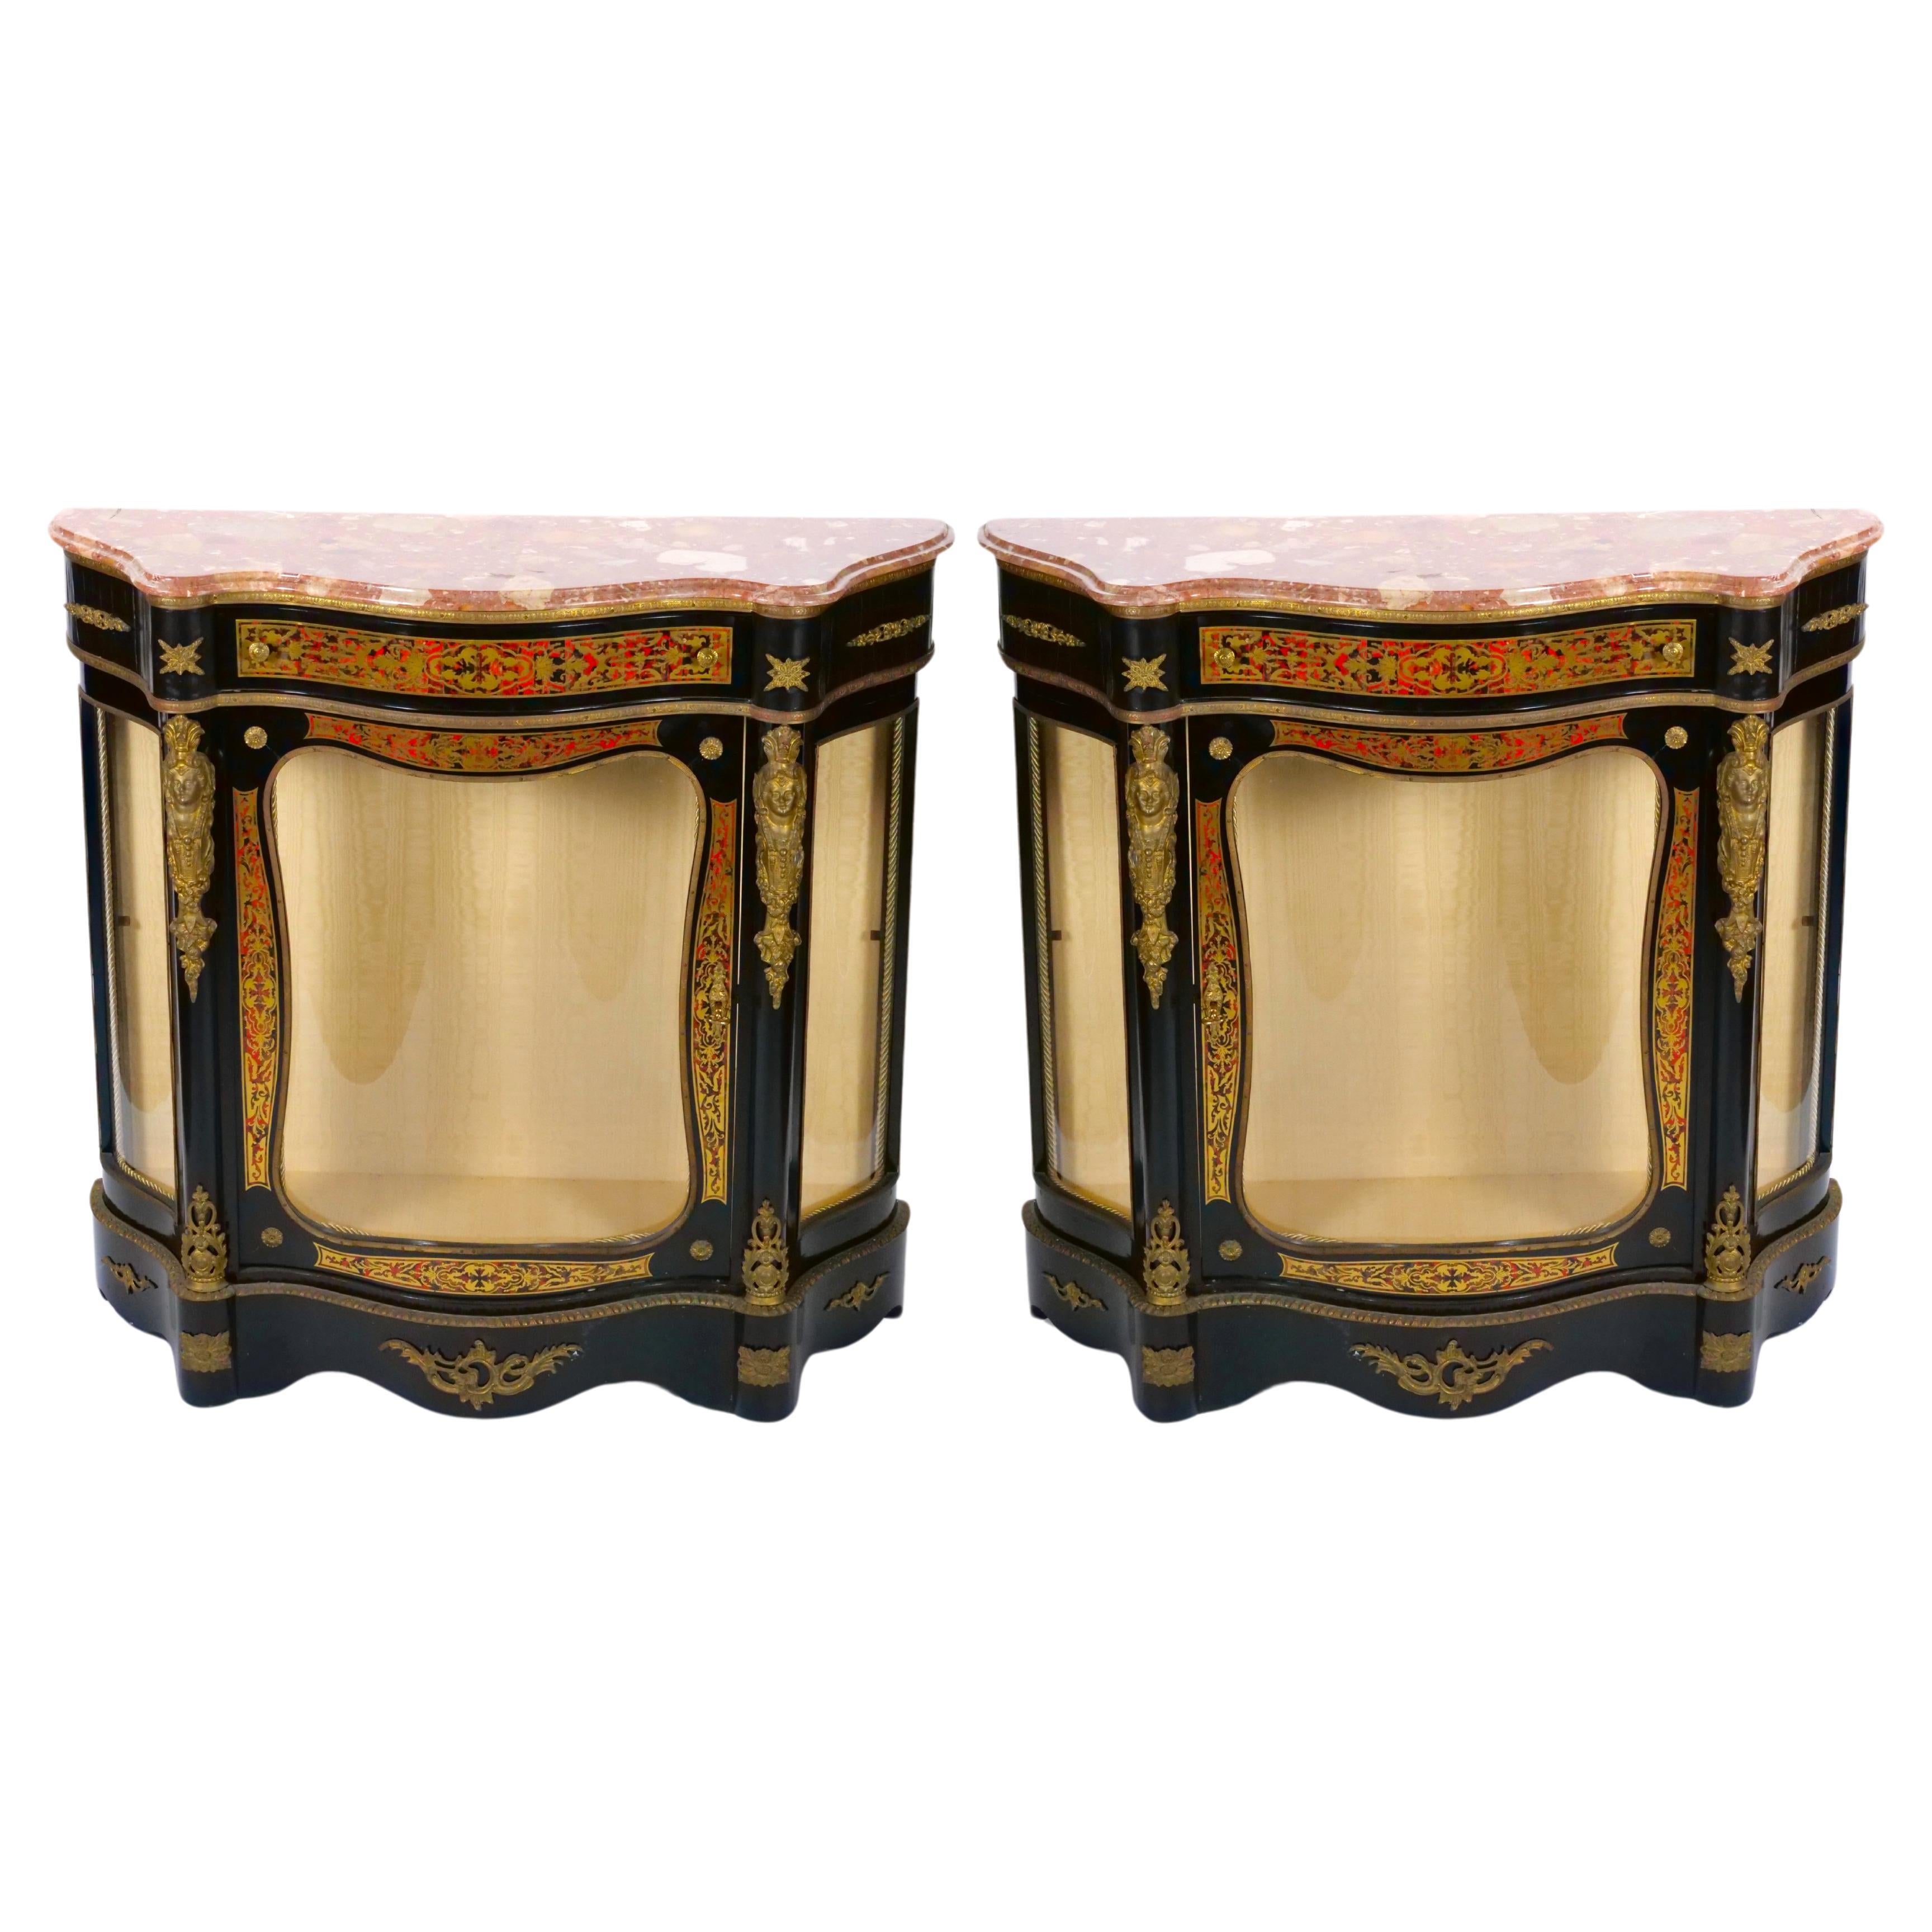 Elevate your living space with this Pair of Antique Napoleon III Ebonized Demilune Shaped Side Cabinets, a remarkable display of opulence and craftsmanship. These cabinets are more than just functional storage units; they are exquisite pieces of